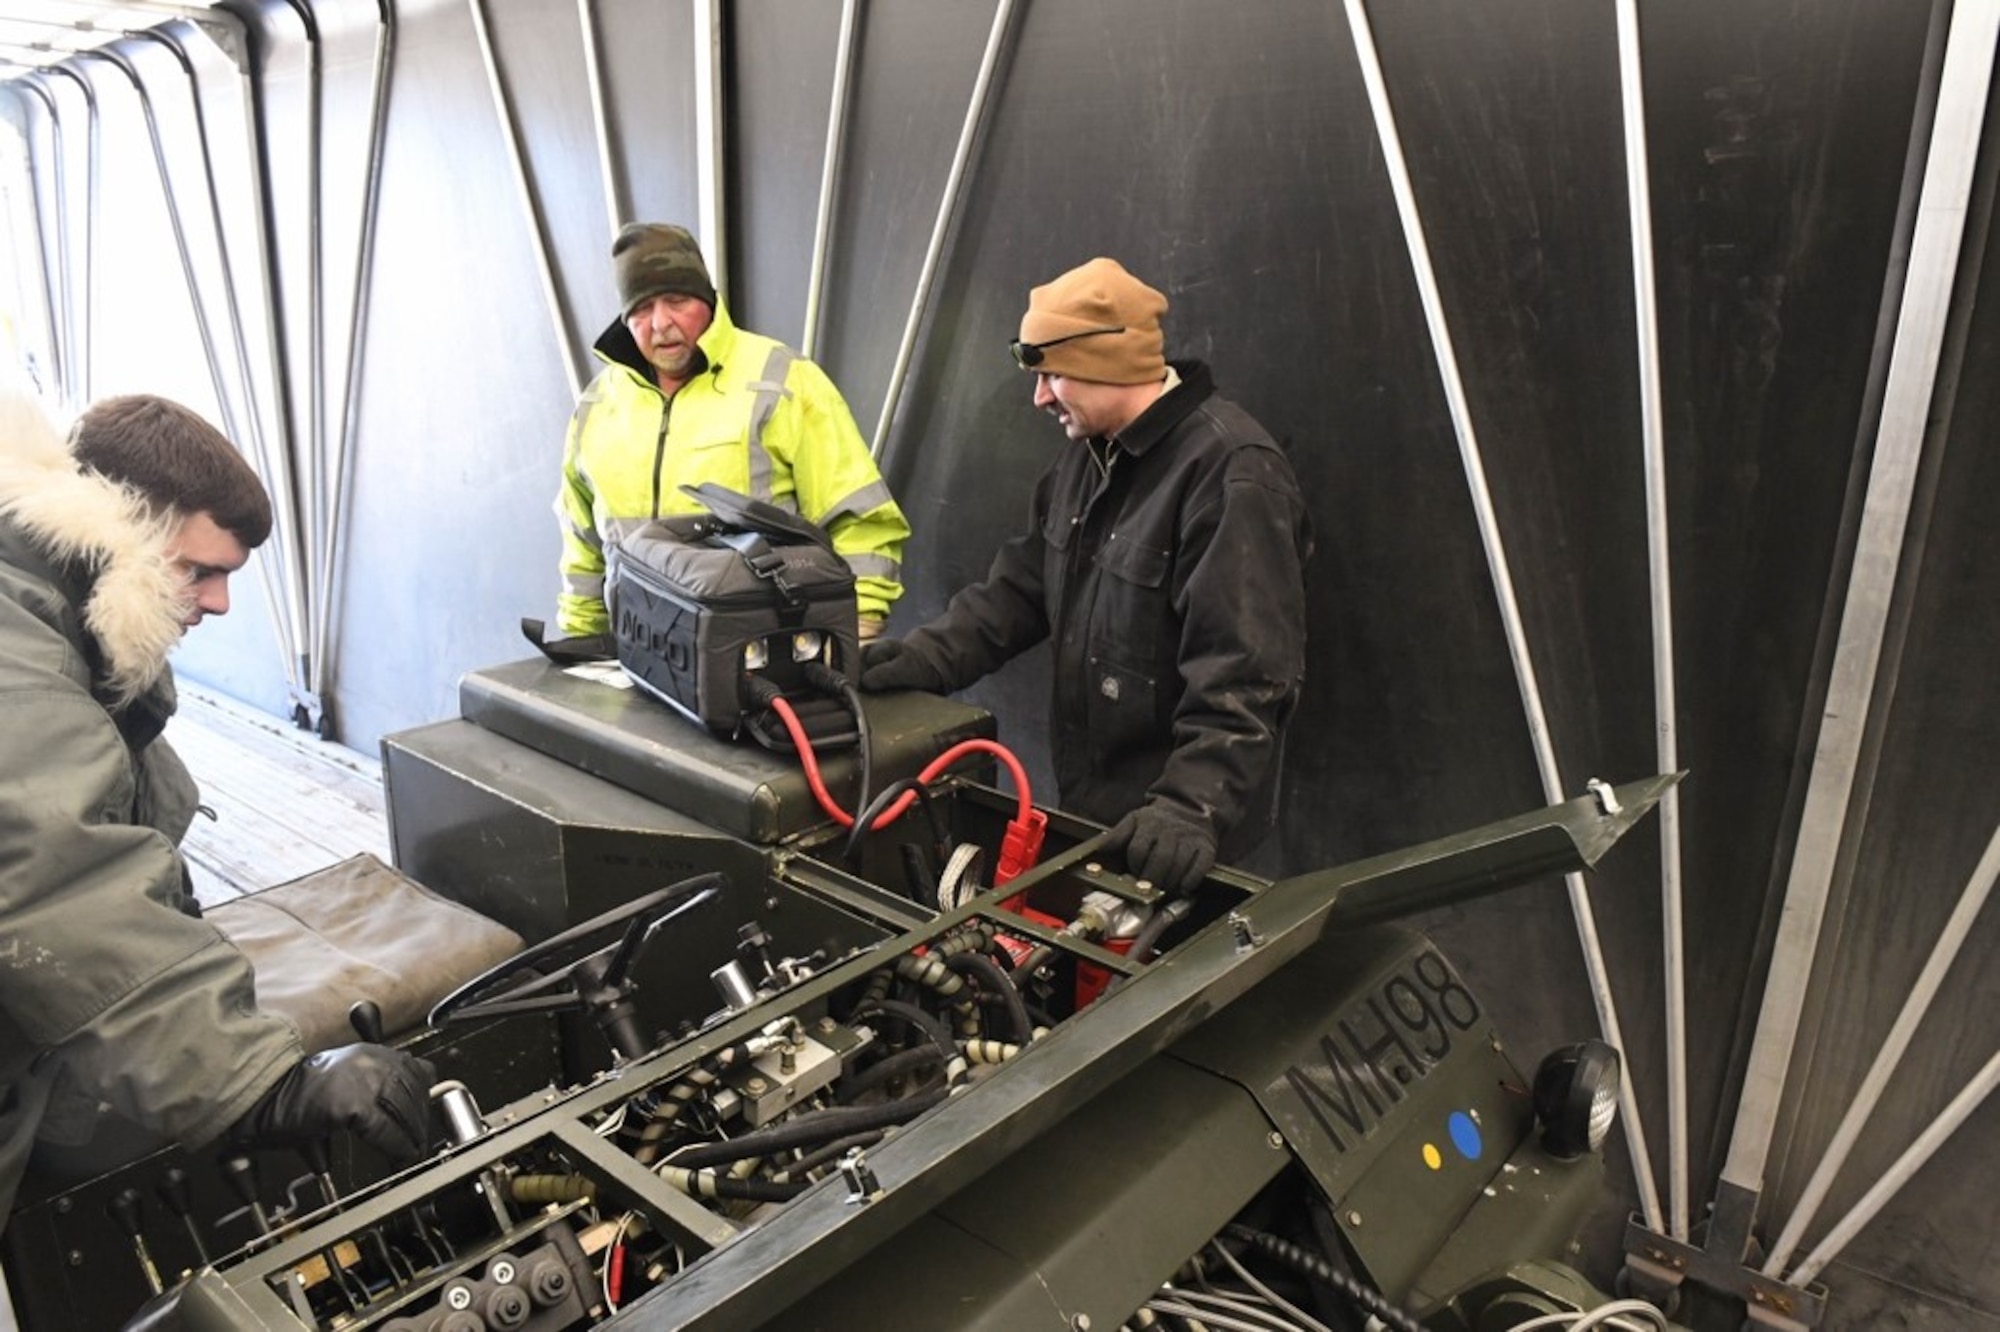 Members from the 28th Logistics Readiness Squadron test an all-terrain vehicle at Ellsworth Air Force Base, S.D., Jan. 16, 2020. The 28th LRS is responsible for repairing all of Ellsworth AFB’s vehicles and ensuring they are ready to work in any condition.